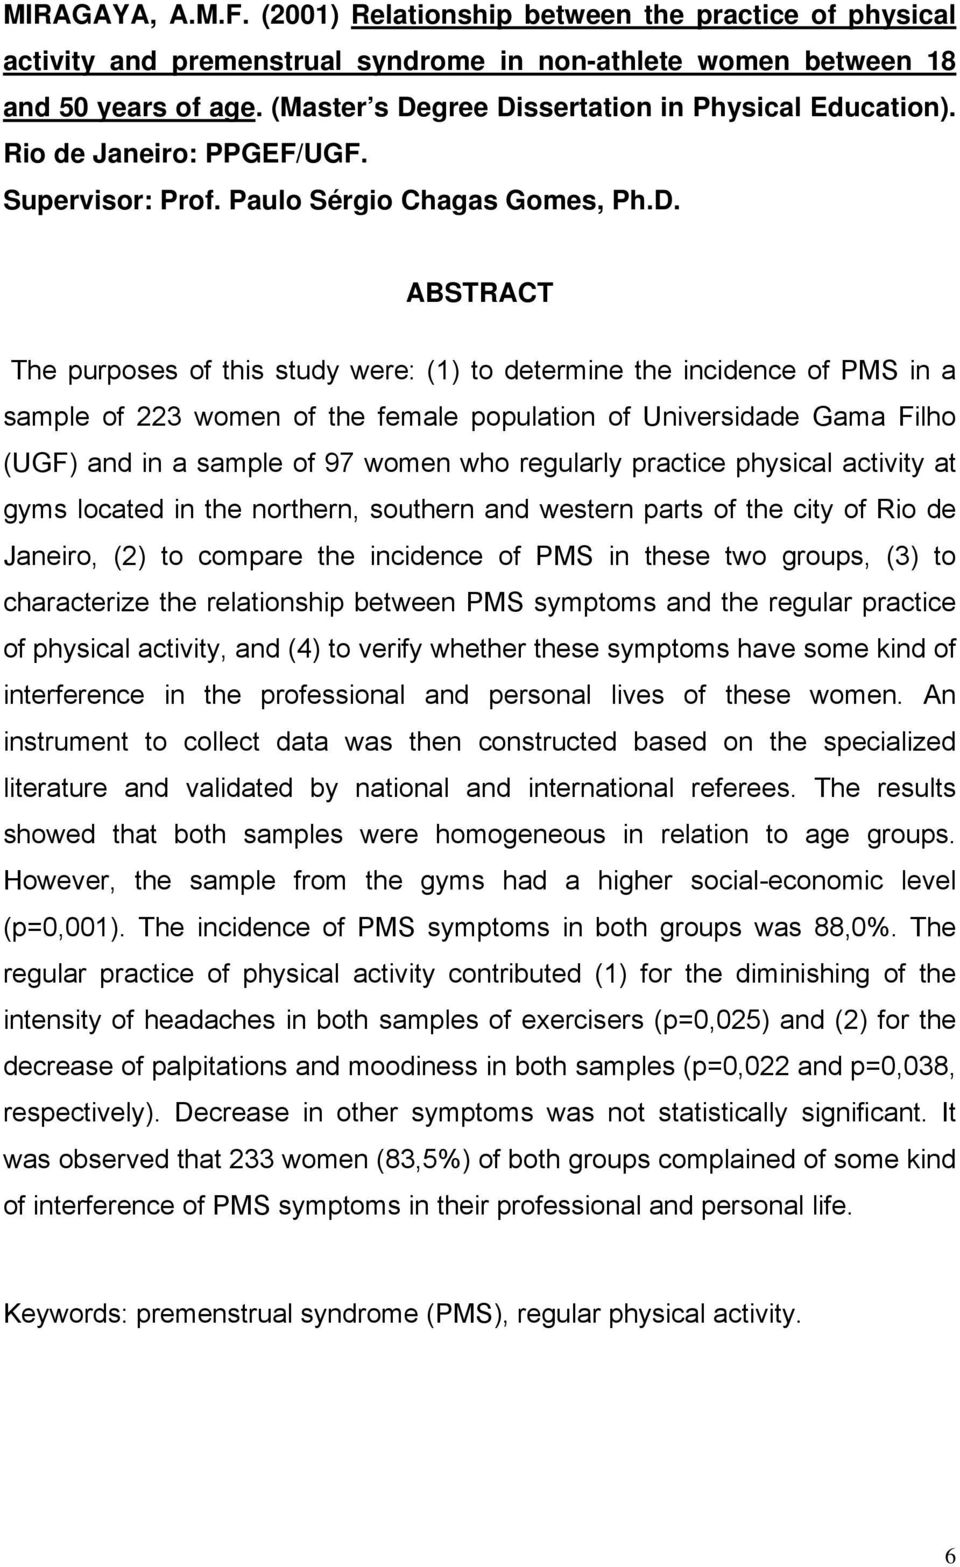 ABSTRACT The purposes of this study were: (1) to determie the icidece of PMS i a sample of 223 wome of the female populatio of Uiversidade Gama Filho (UGF) ad i a sample of 97 wome who regularly